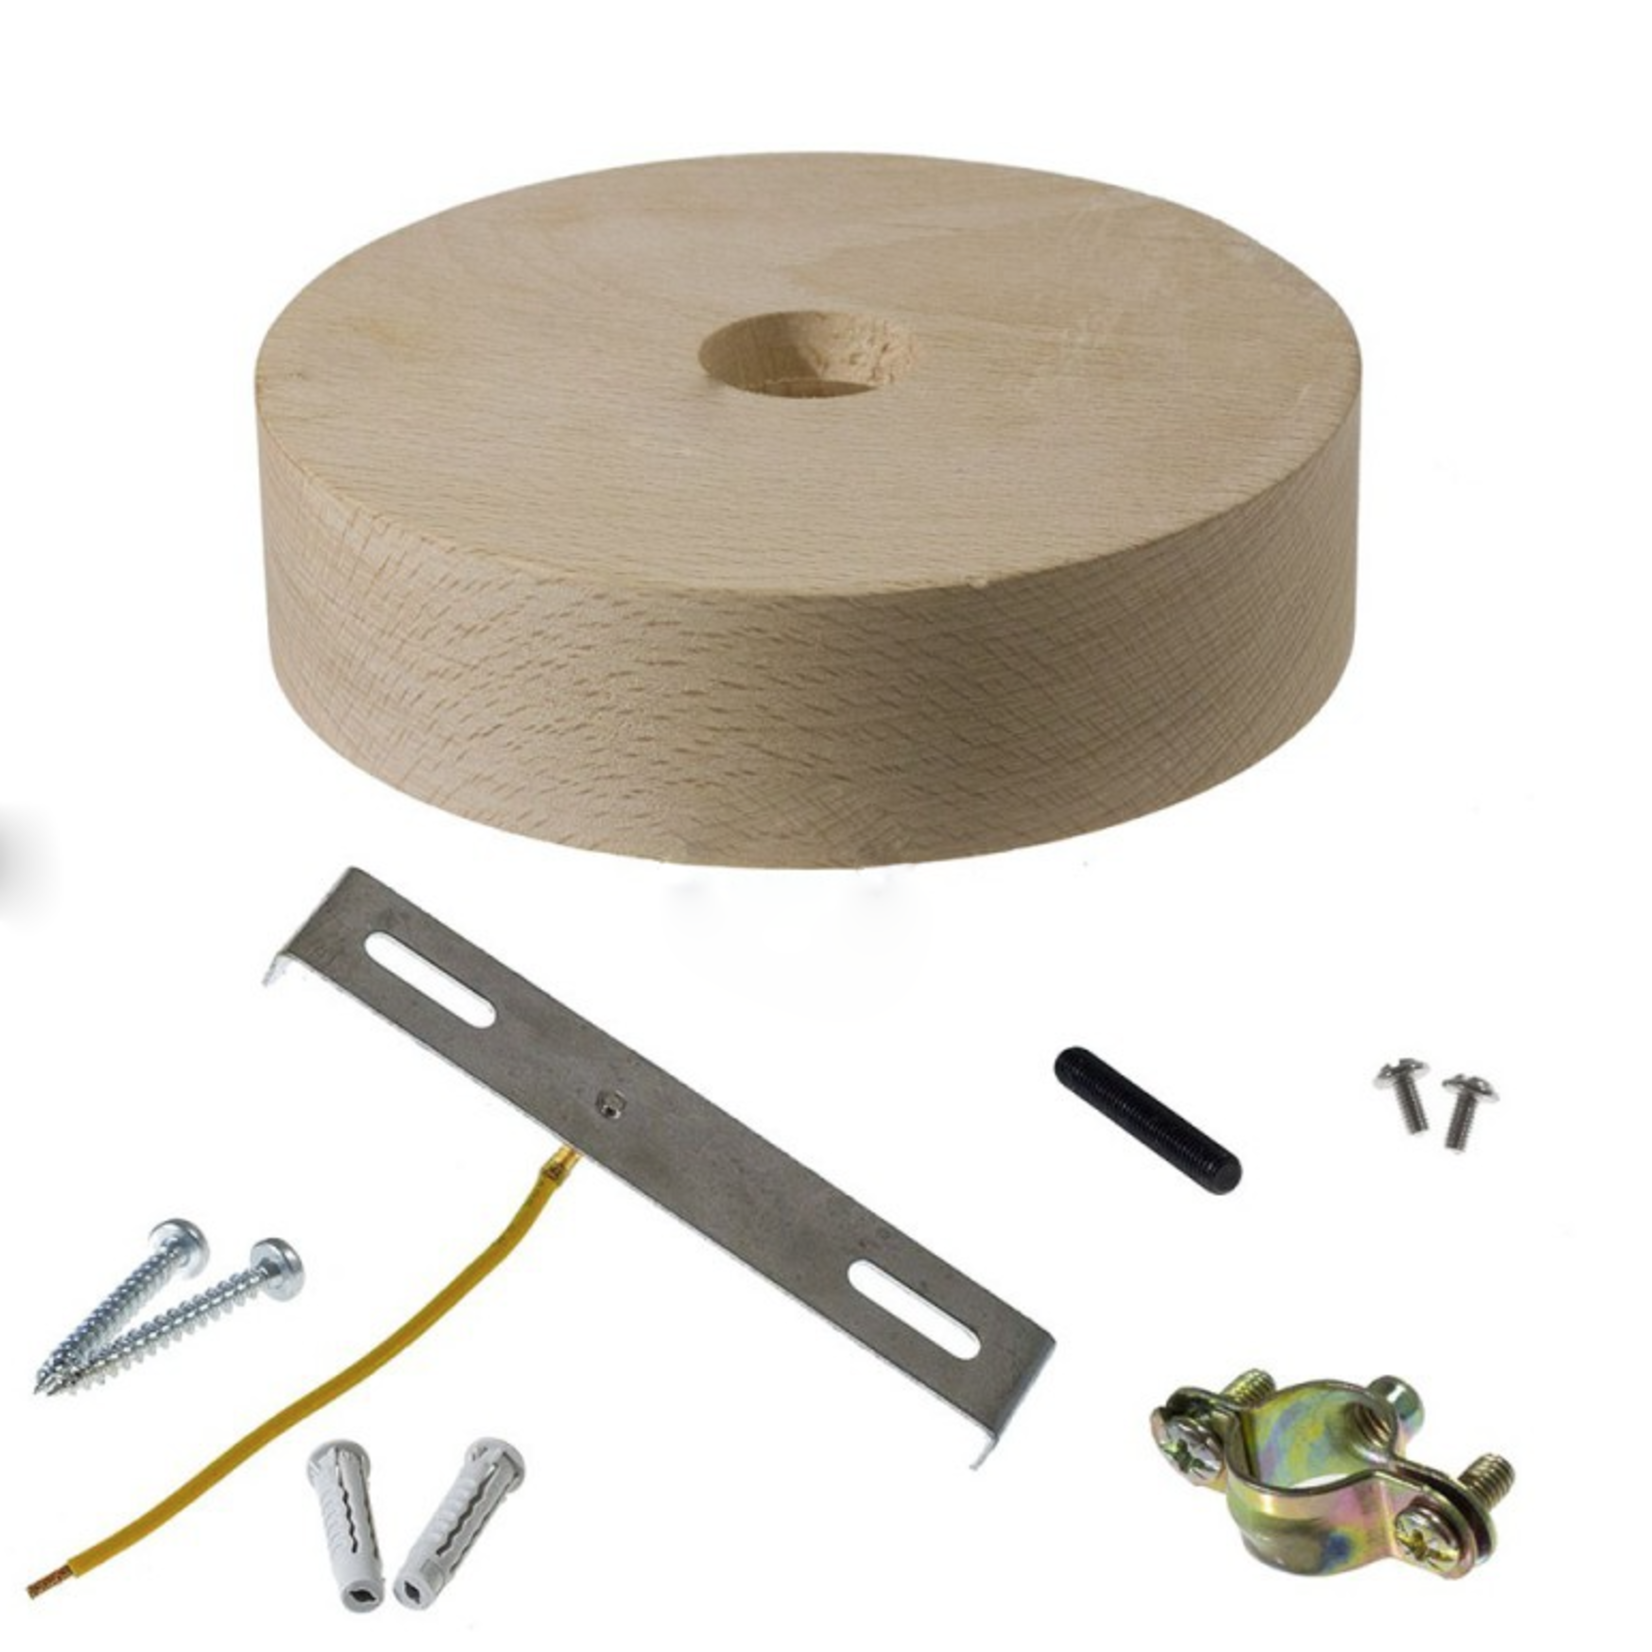 CCIT Wooden ceiling rose kit for 2XL electrical cord complete with accessories.